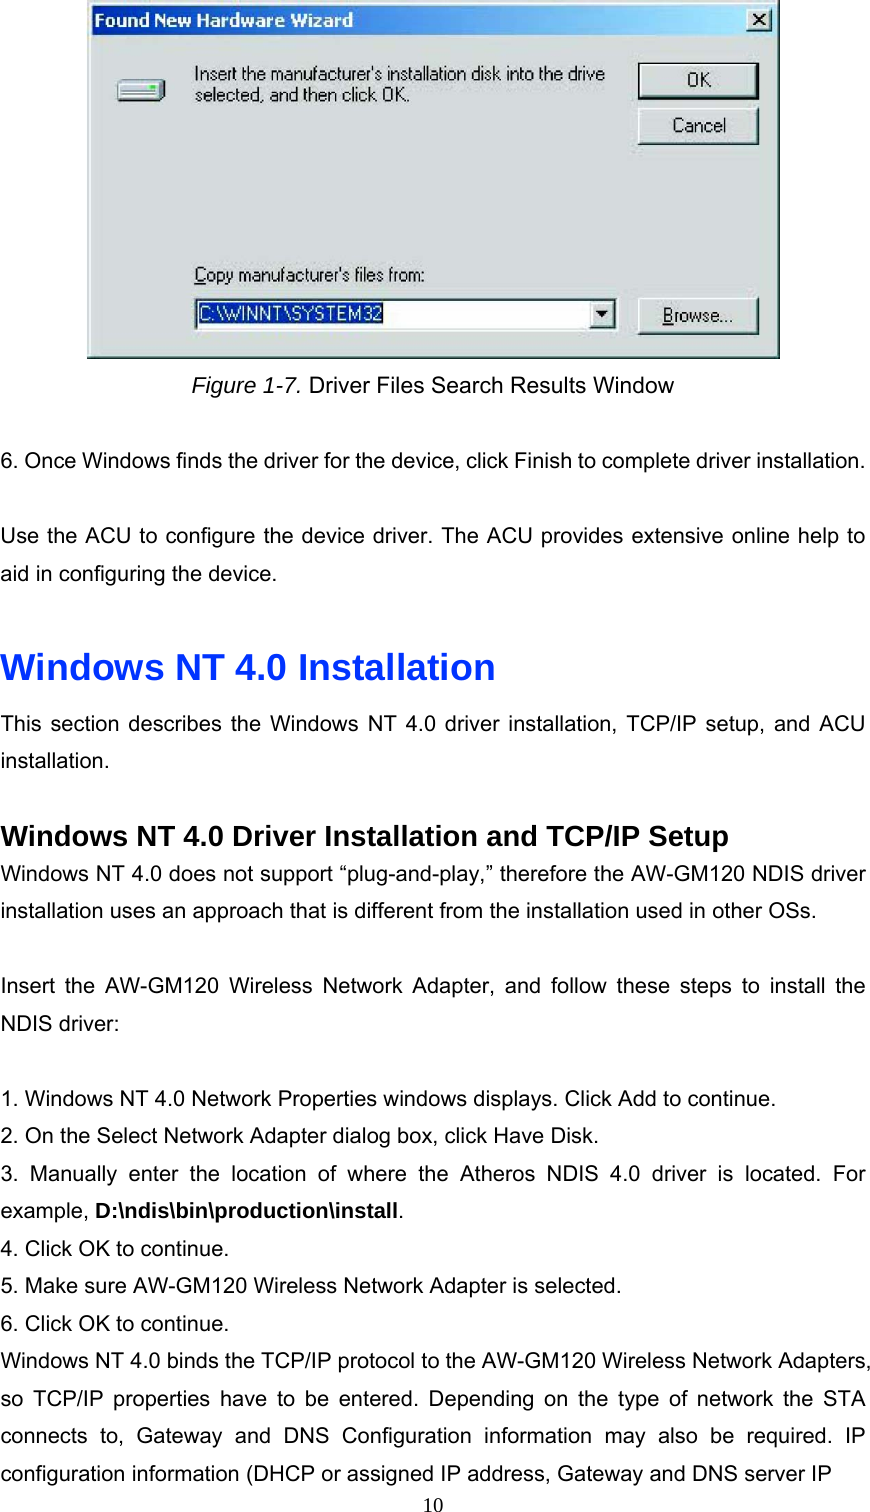  Figure 1-7. Driver Files Search Results Window  6. Once Windows finds the driver for the device, click Finish to complete driver installation.  Use the ACU to configure the device driver. The ACU provides extensive online help to aid in configuring the device.  Windows NT 4.0 Installation This section describes the Windows NT 4.0 driver installation, TCP/IP setup, and ACU installation.  Windows NT 4.0 Driver Installation and TCP/IP Setup Windows NT 4.0 does not support “plug-and-play,” therefore the AW-GM120 NDIS driver installation uses an approach that is different from the installation used in other OSs.  Insert the AW-GM120 Wireless Network Adapter, and follow these steps to install the NDIS driver:  1. Windows NT 4.0 Network Properties windows displays. Click Add to continue. 2. On the Select Network Adapter dialog box, click Have Disk. 3. Manually enter the location of where the Atheros NDIS 4.0 driver is located. For example, D:\ndis\bin\production\install. 4. Click OK to continue. 5. Make sure AW-GM120 Wireless Network Adapter is selected. 6. Click OK to continue. Windows NT 4.0 binds the TCP/IP protocol to the AW-GM120 Wireless Network Adapters, so TCP/IP properties have to be entered. Depending on the type of network the STA connects to, Gateway and DNS Configuration information may also be required. IP configuration information (DHCP or assigned IP address, Gateway and DNS server IP  10